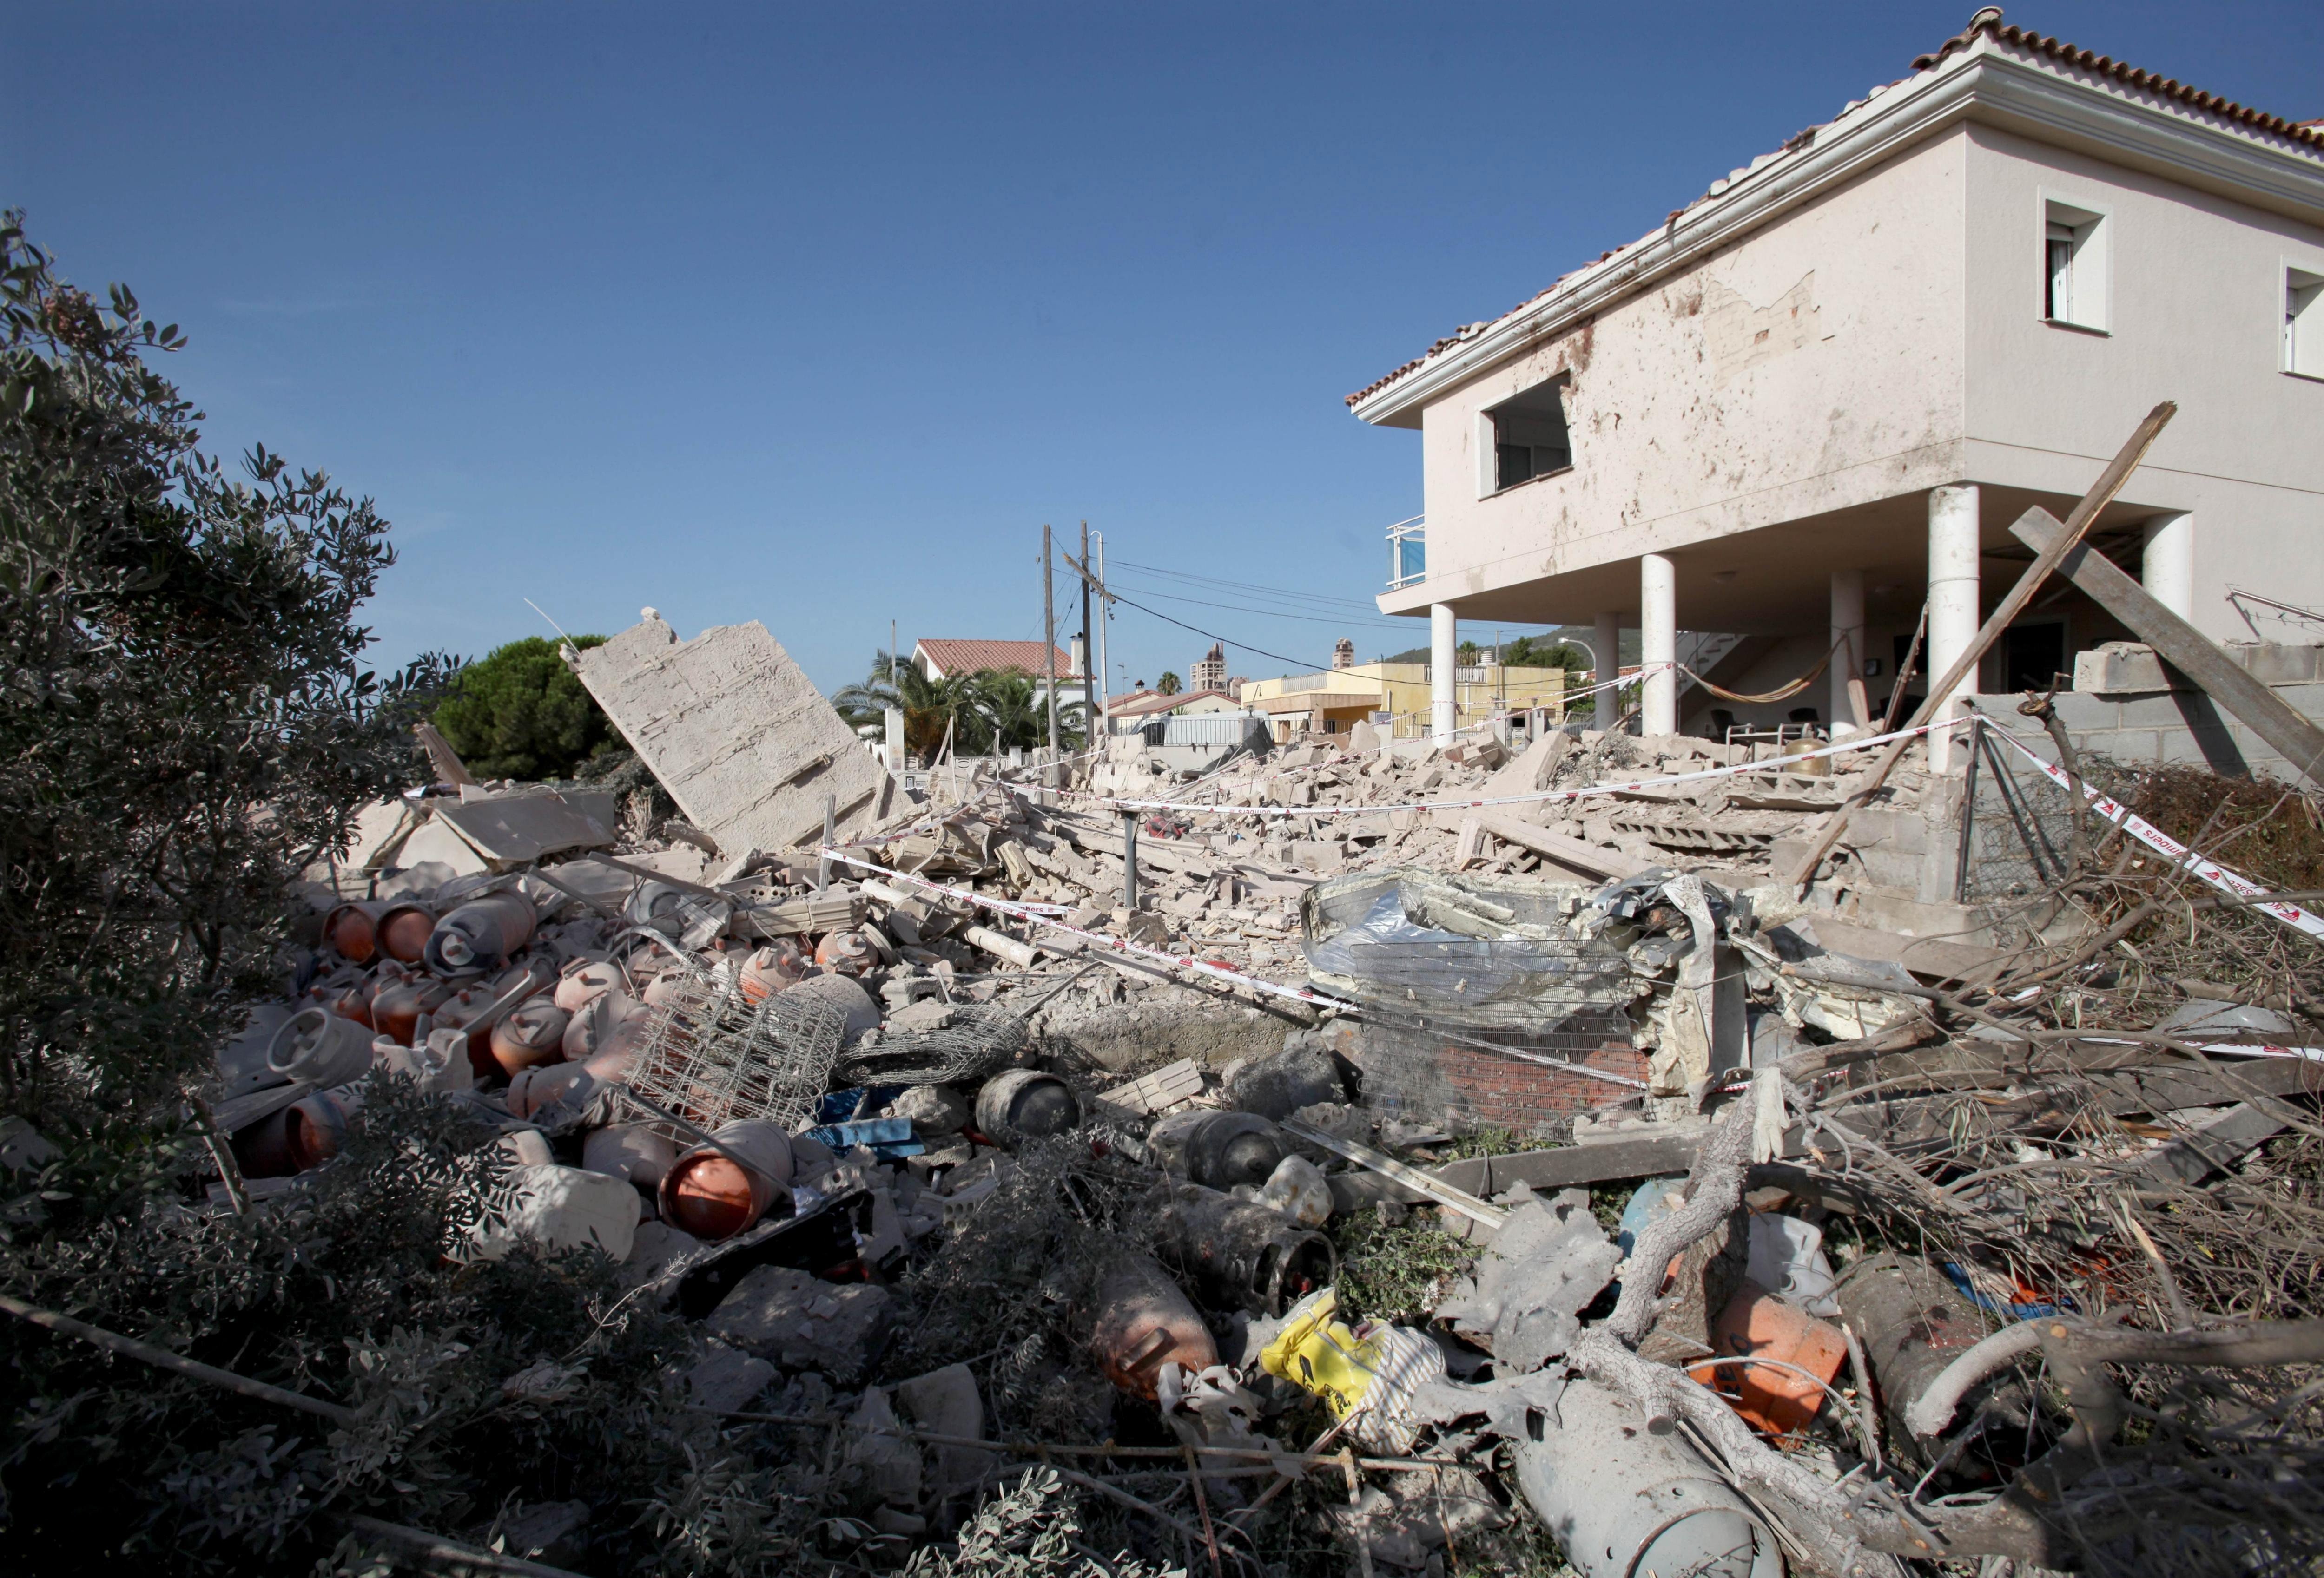 Dozens of gas cannisters are strewn amid the rubble of a house that exploded last Wednesday in Alcanar, northeastern Spain. Police now believe the home was the site of a bomb factory being run by the terrorists responsible for last week’s attacks in Barcelona and Cabriles. Photo: EPA